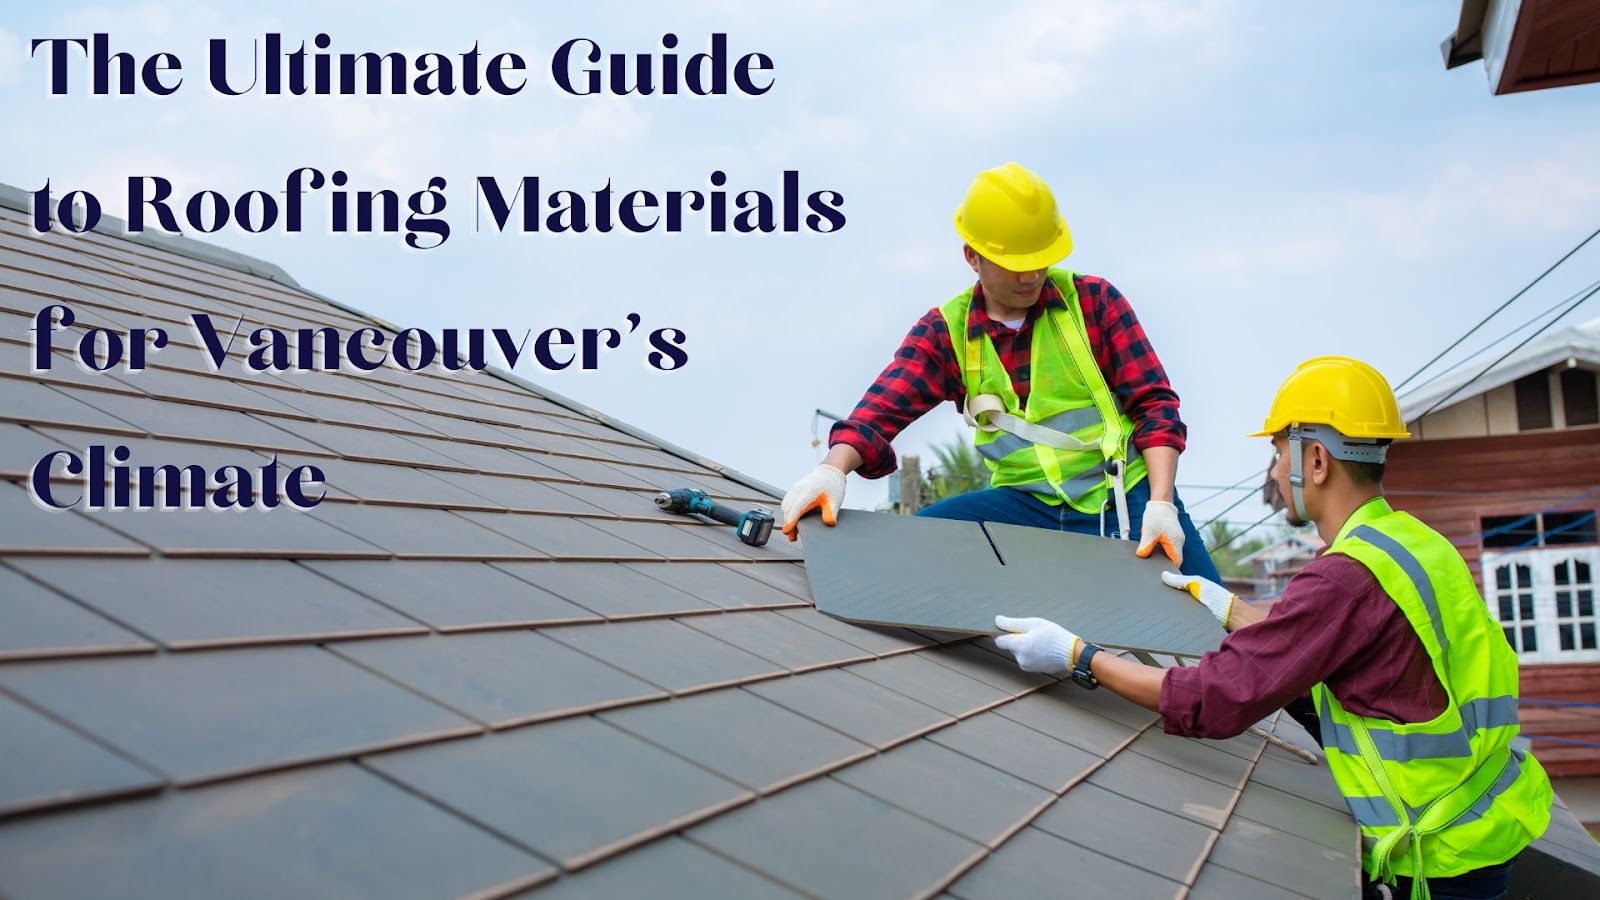 The Ultimate Guide to Roofing Materials for Vancouver’s Climate